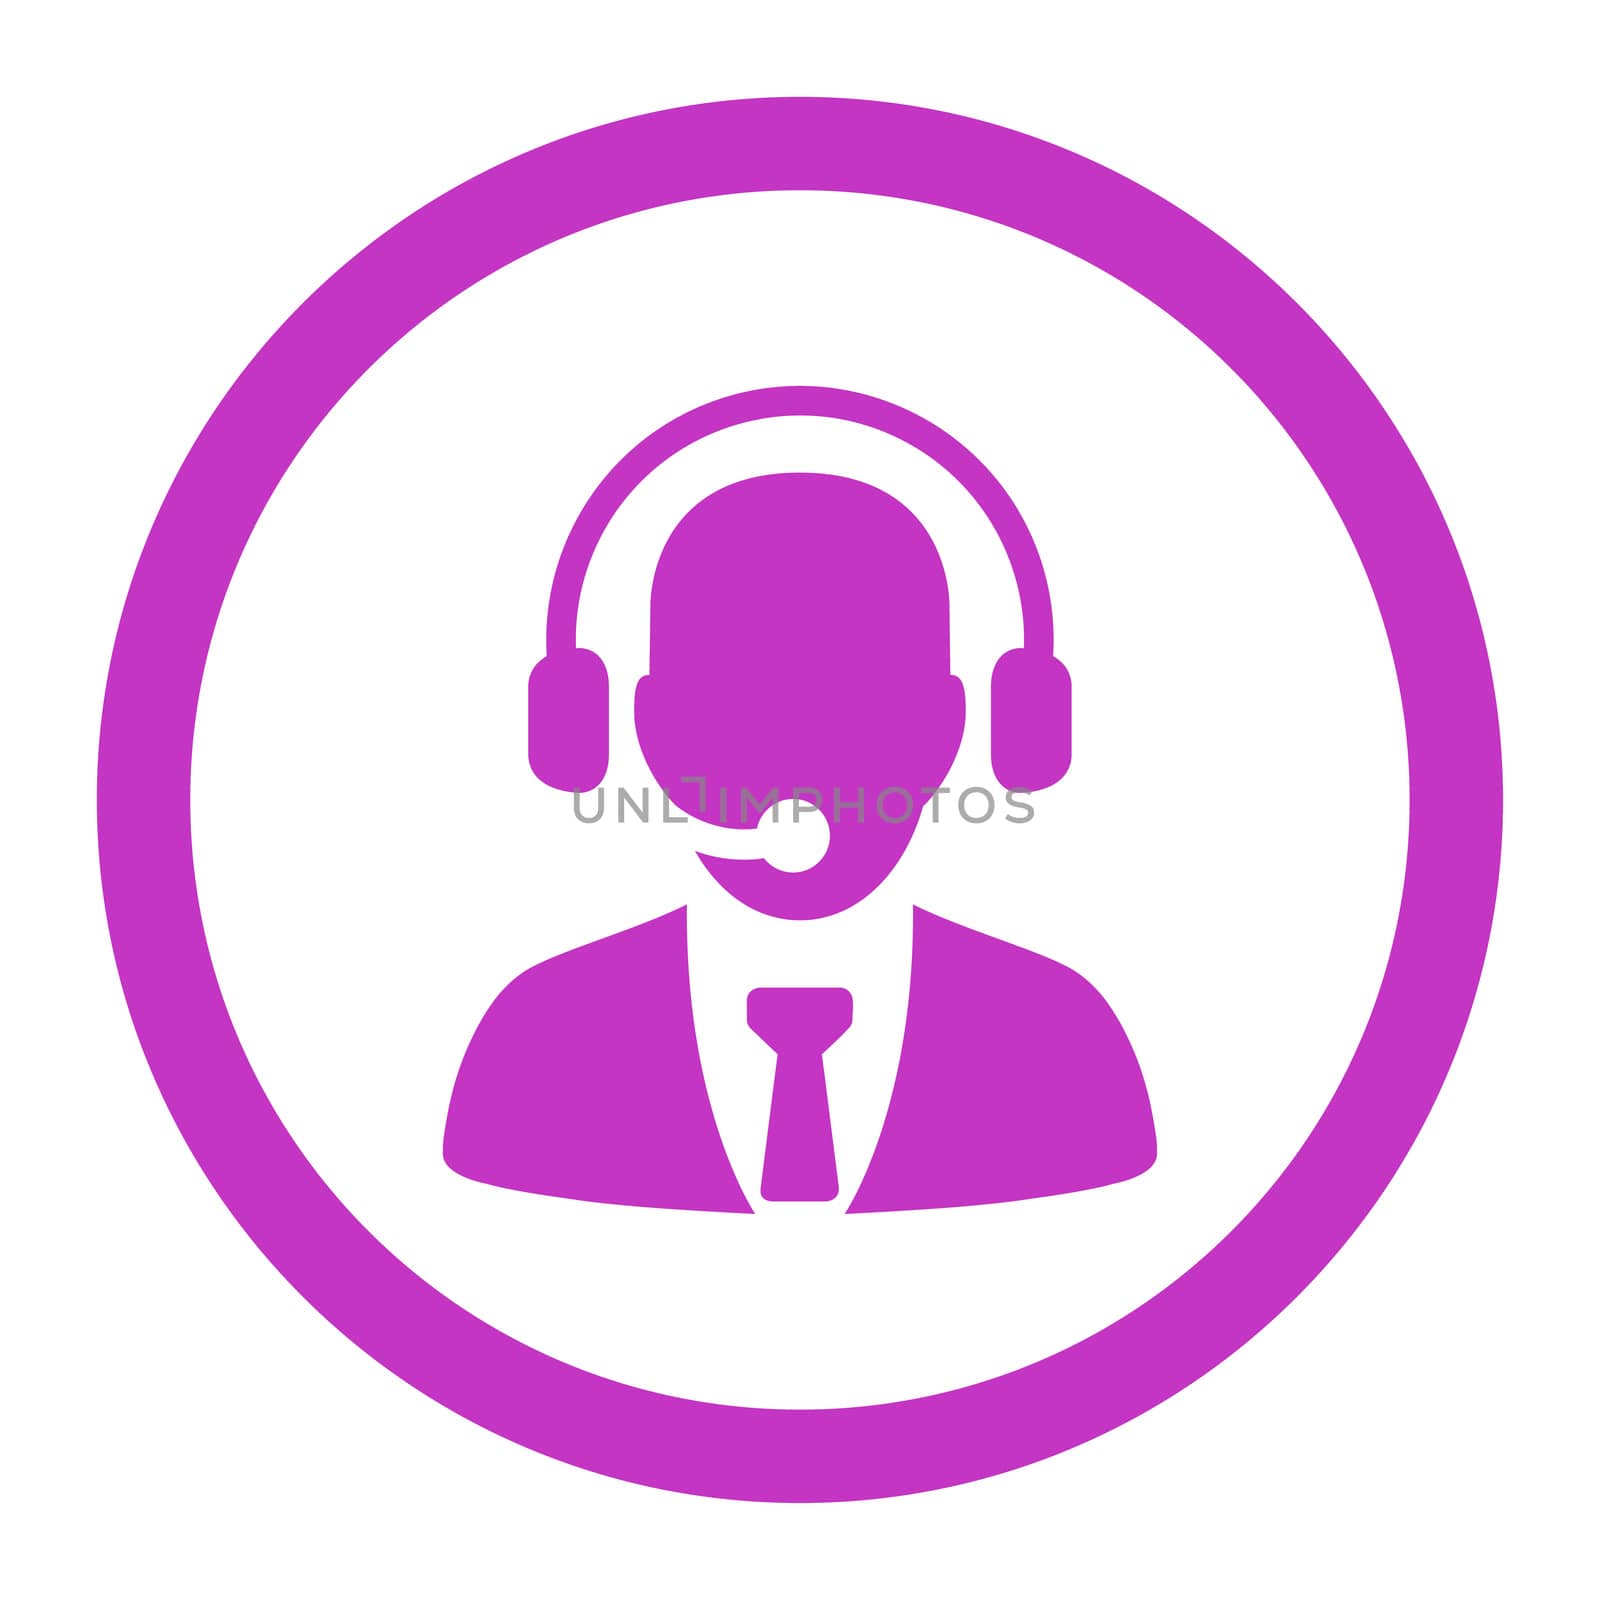 Call center glyph icon. This rounded flat symbol is drawn with violet color on a white background.